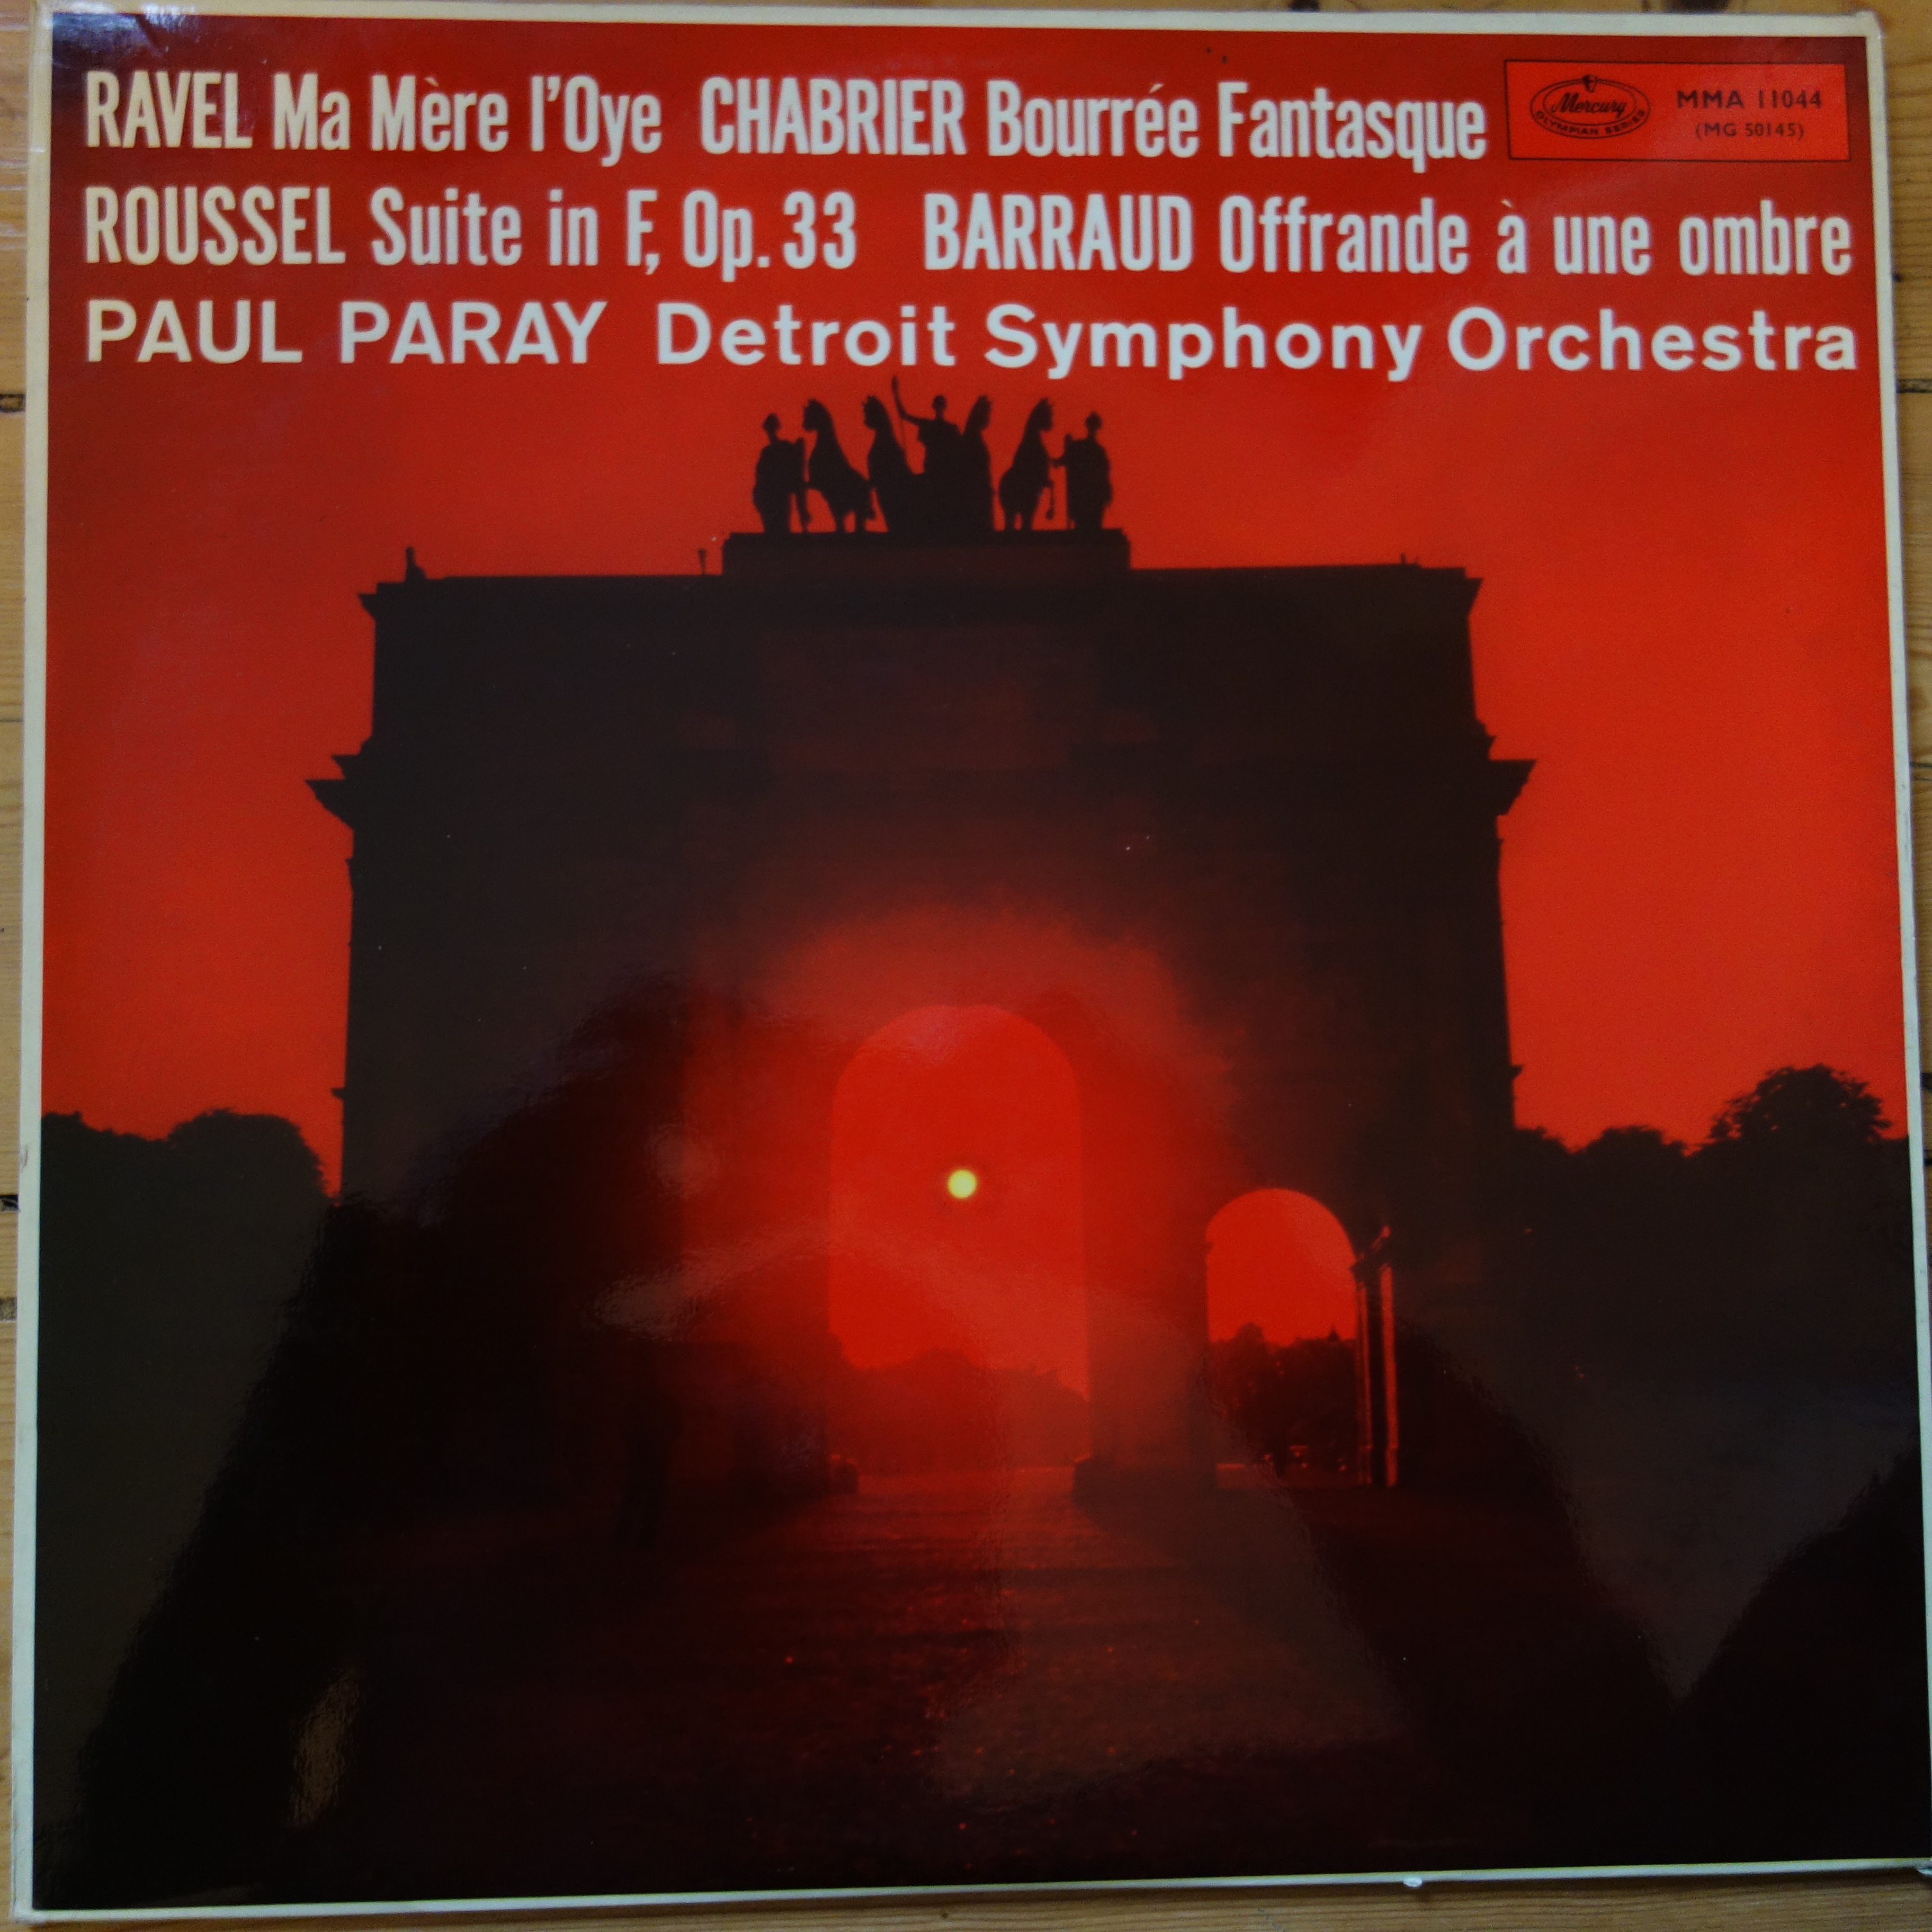 MMA 11044 Ravel / Chabrier / Rousell / Barraud / Paray